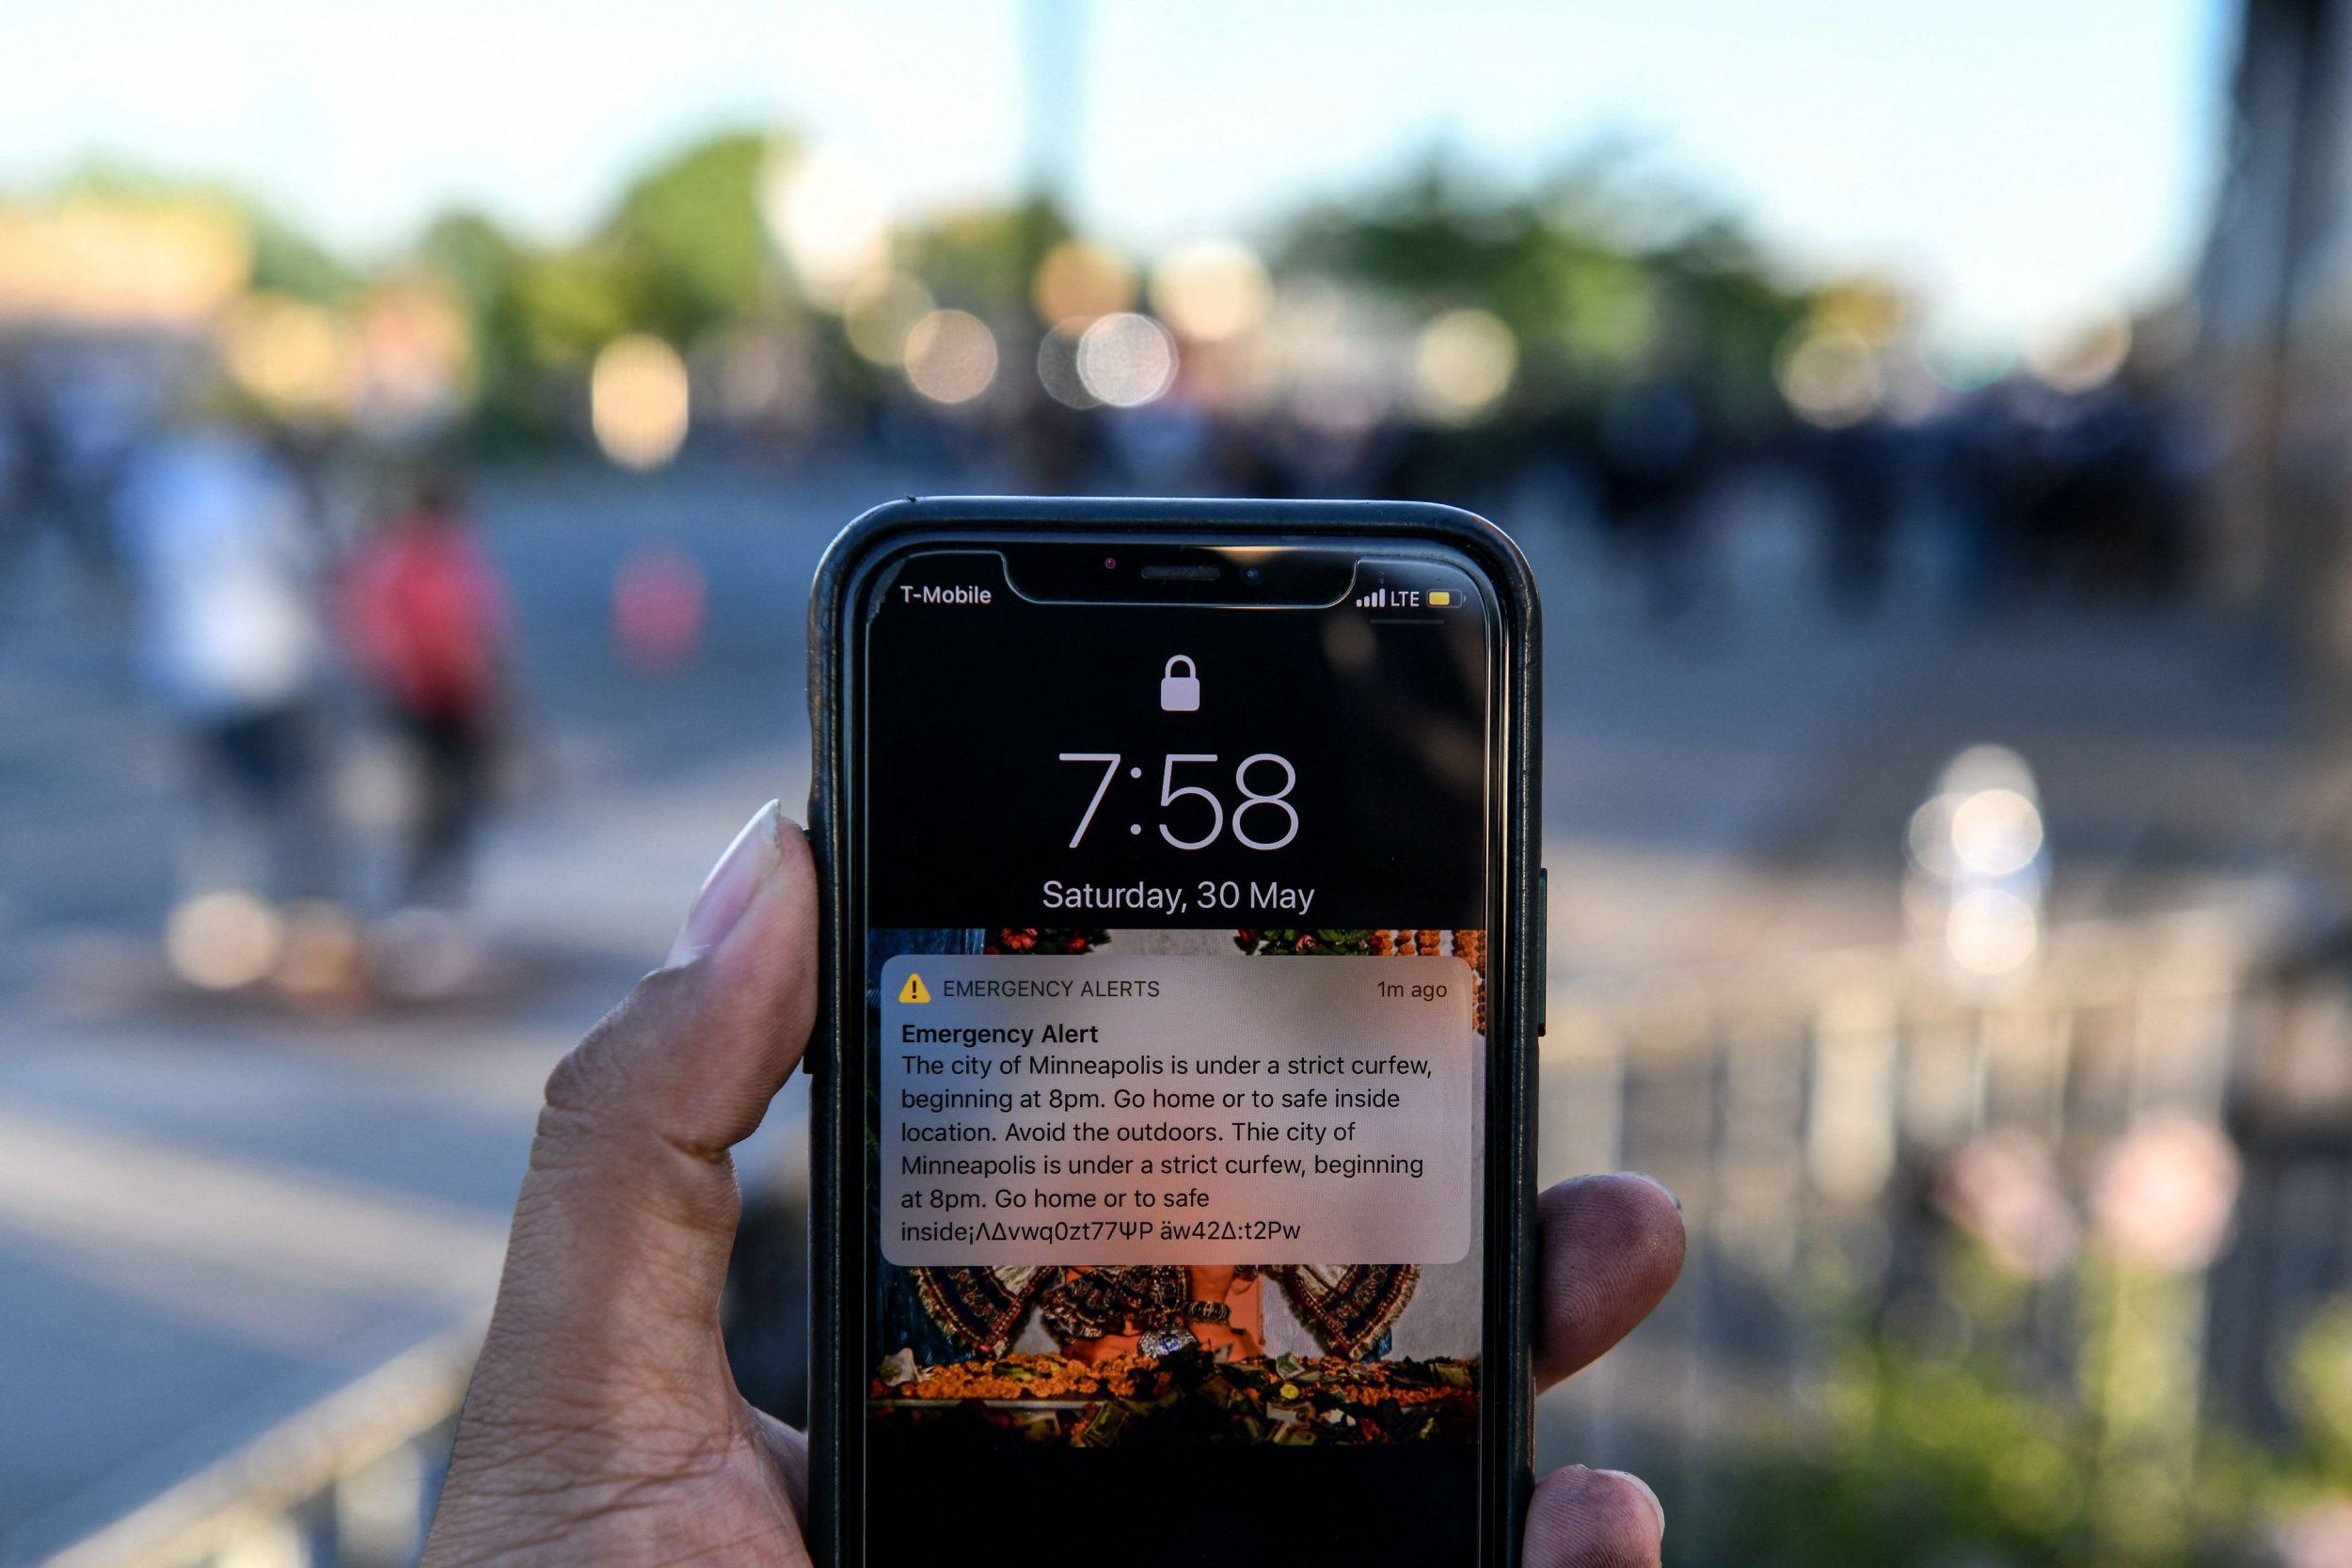 How to turn off the emergency alerts on iPhone and Android?